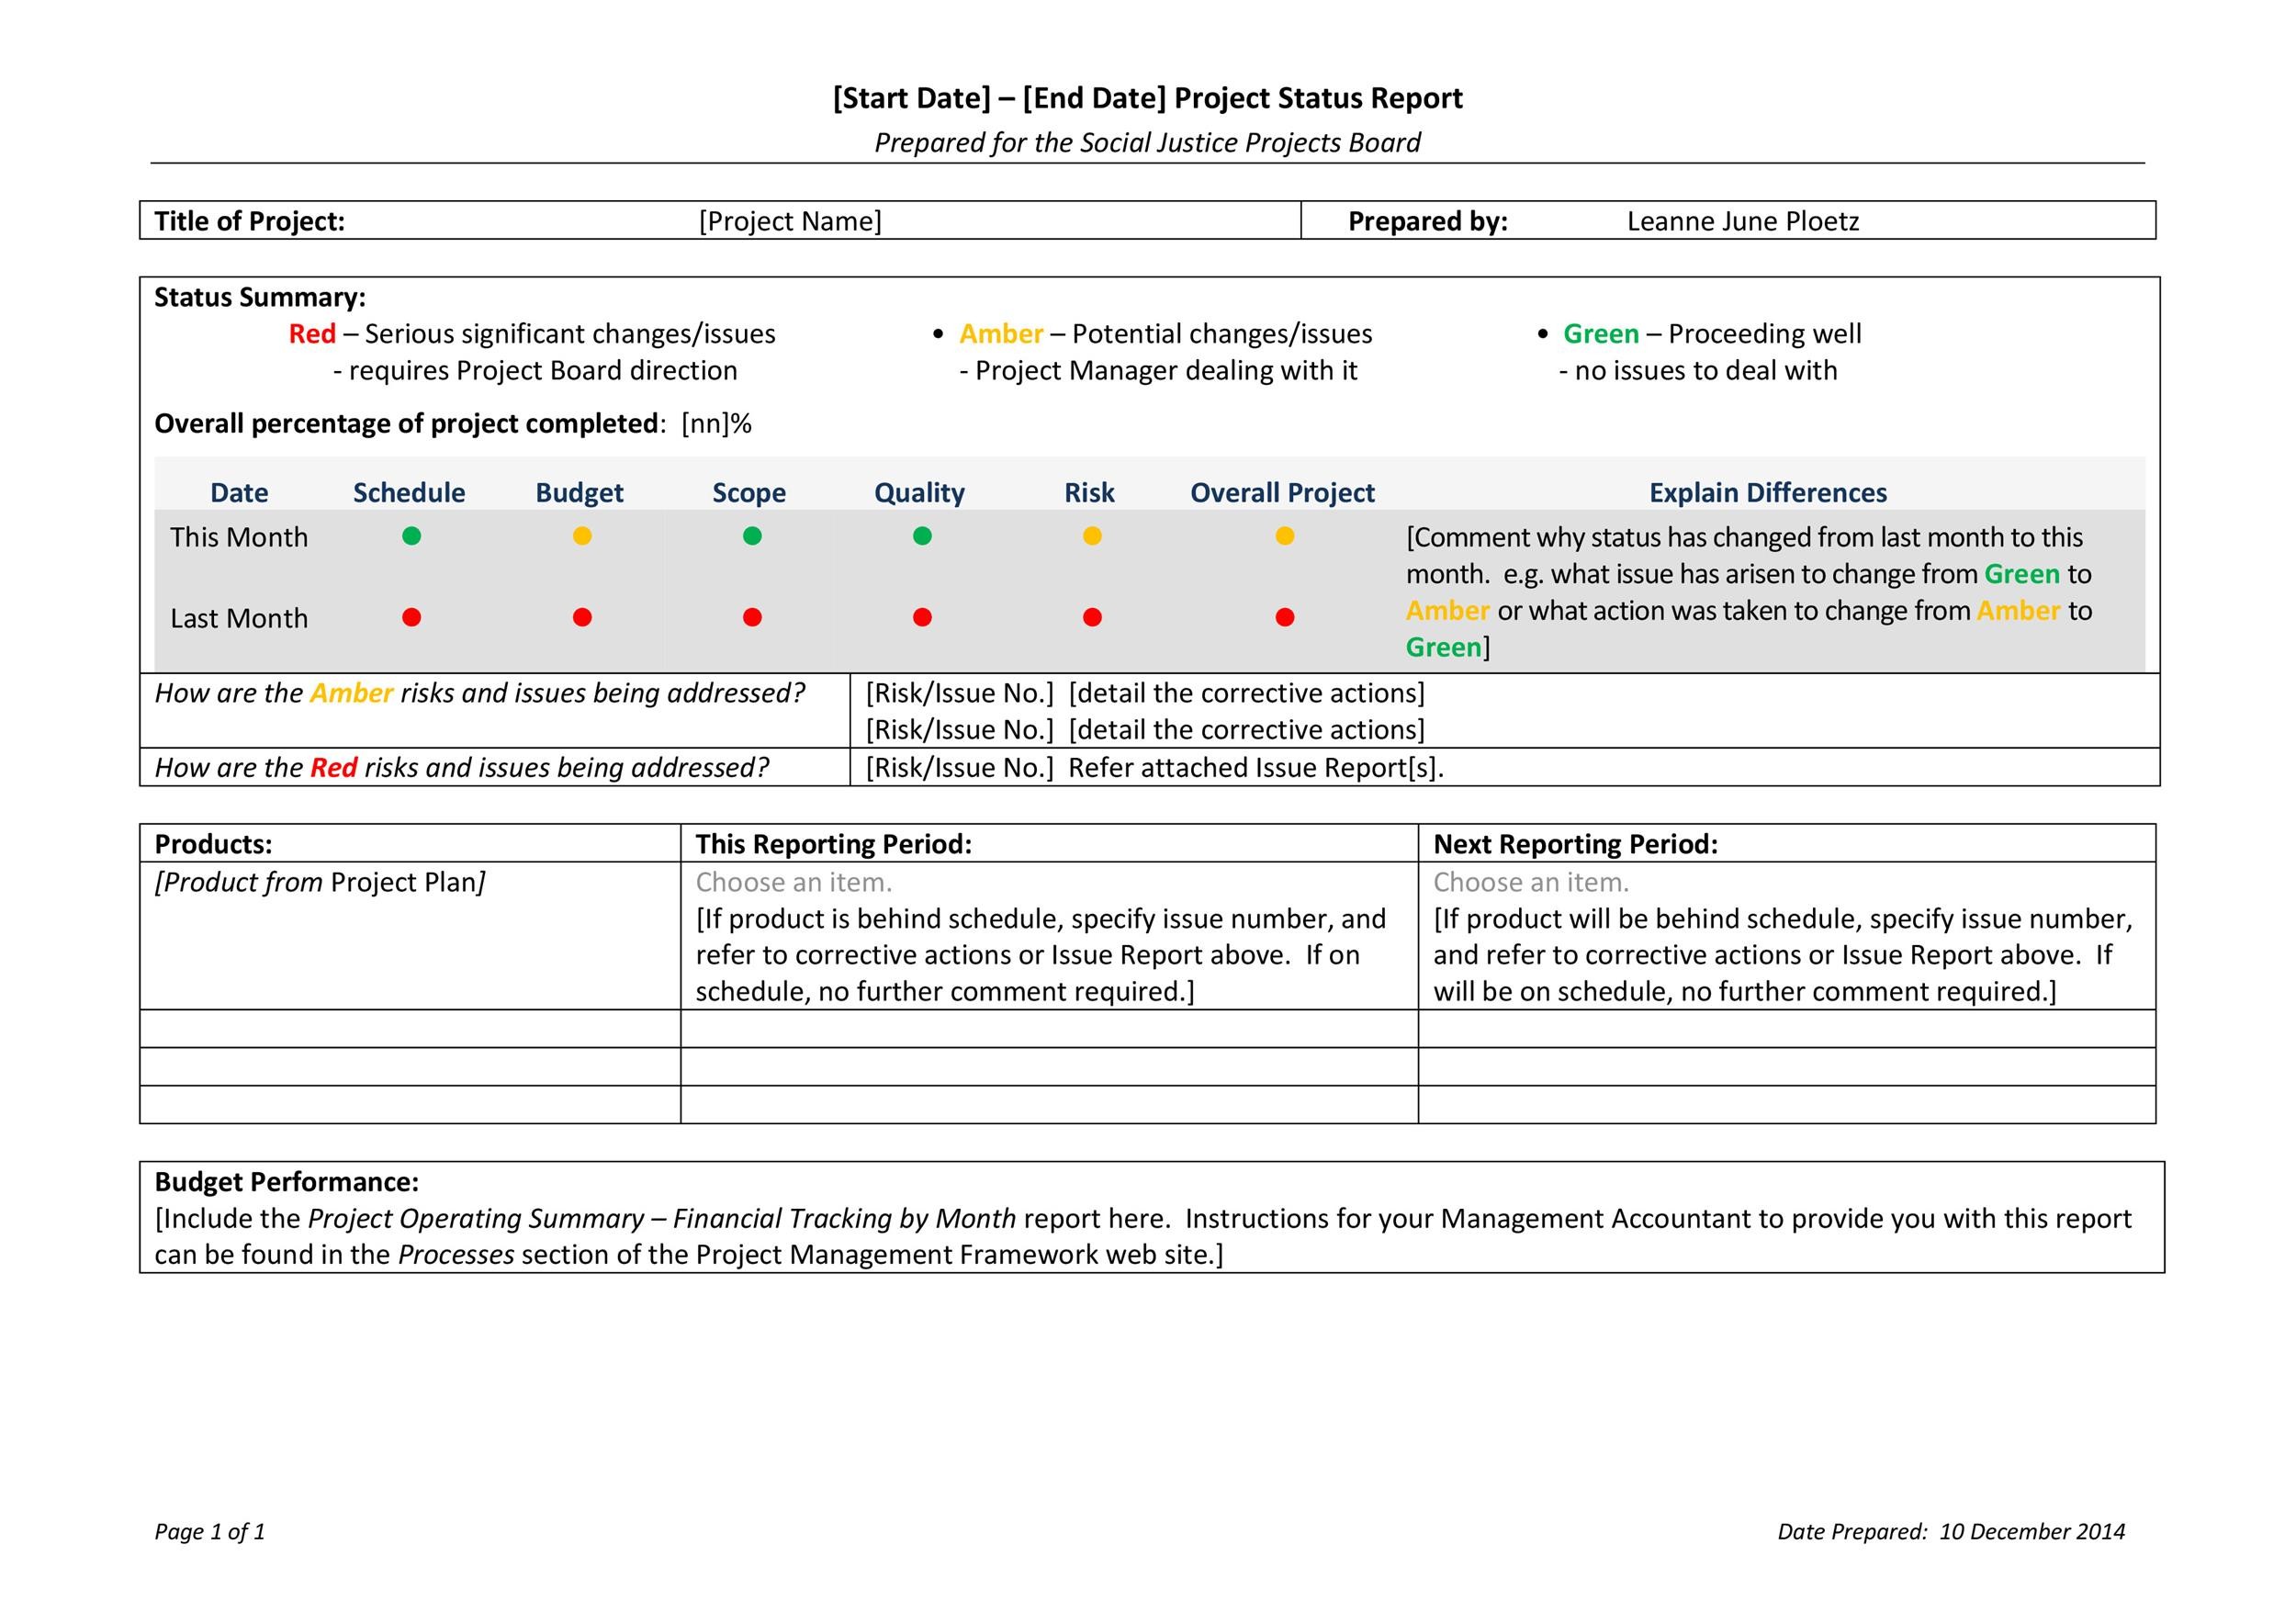 40+ Project Status Report Templates [Word, Excel, PPT] ᐅ TemplateLab